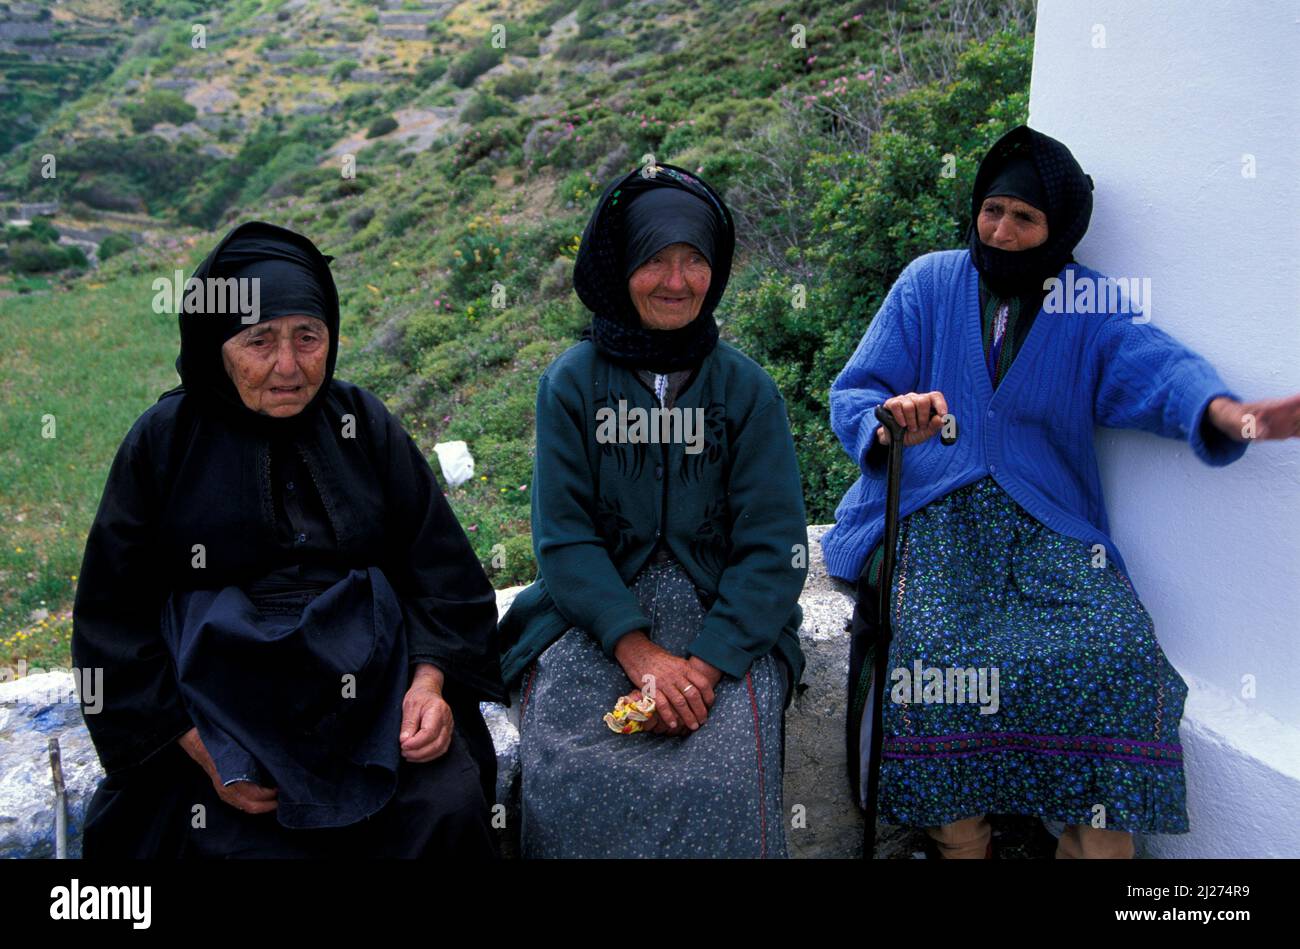 Donne in Olymbos, Olimpos, isola di Karpathos, Dodecaneso, Grecia, Europa Foto Stock